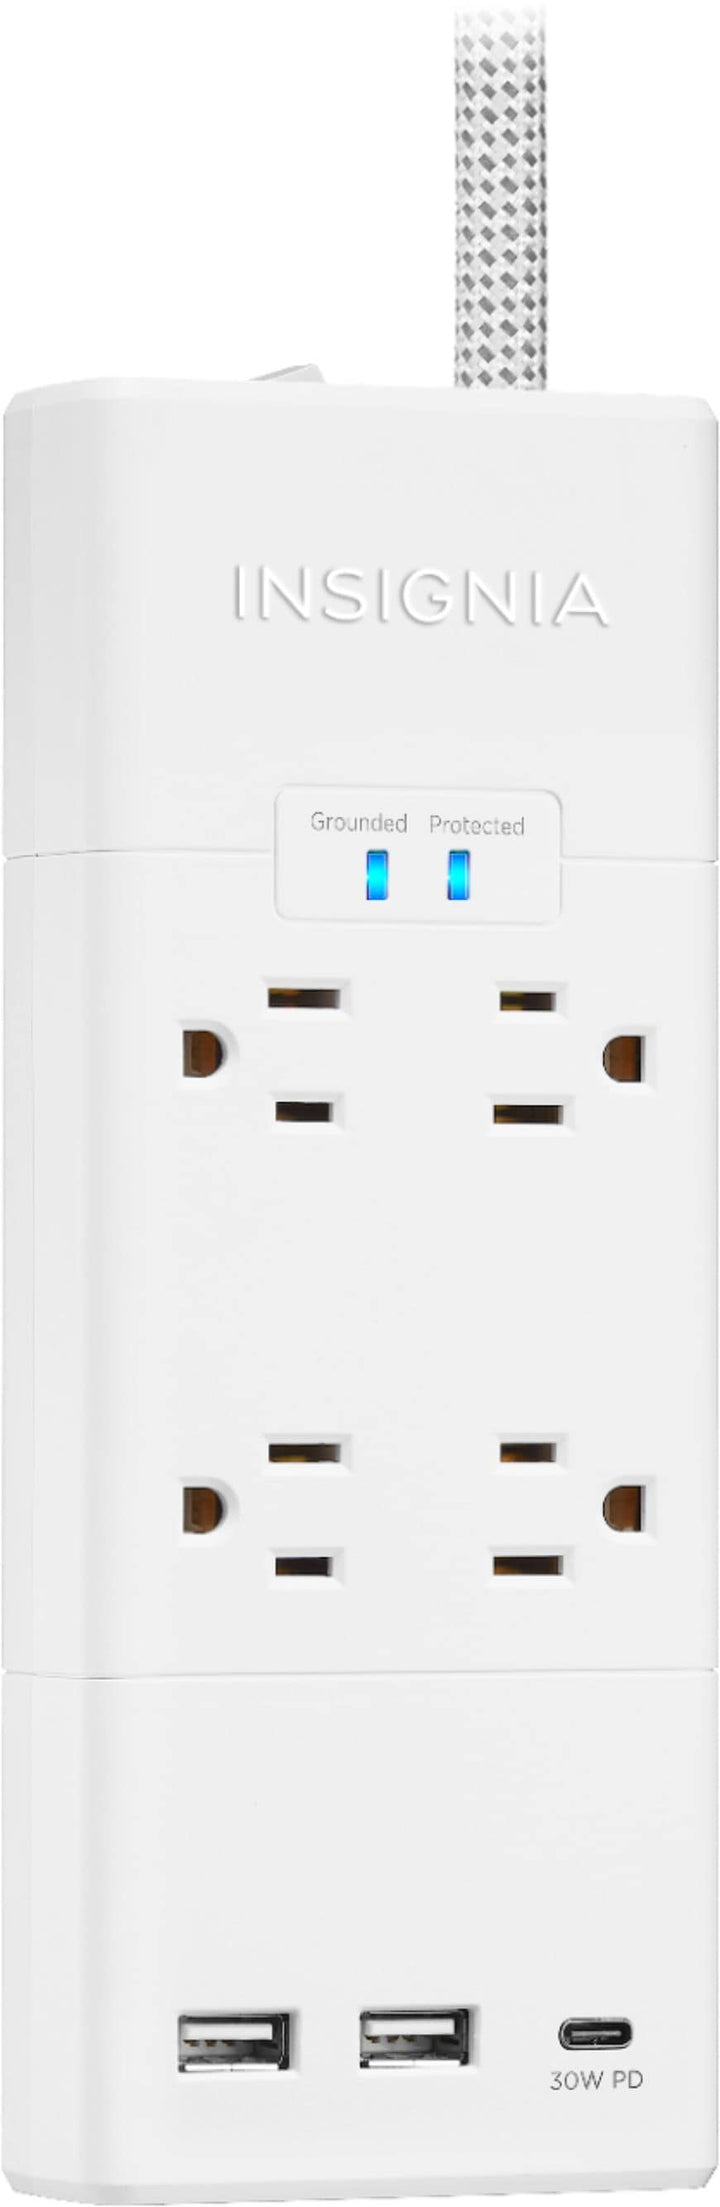 Insignia™ - 4-Outlet/3-USB Surge Protector Strip - White_2